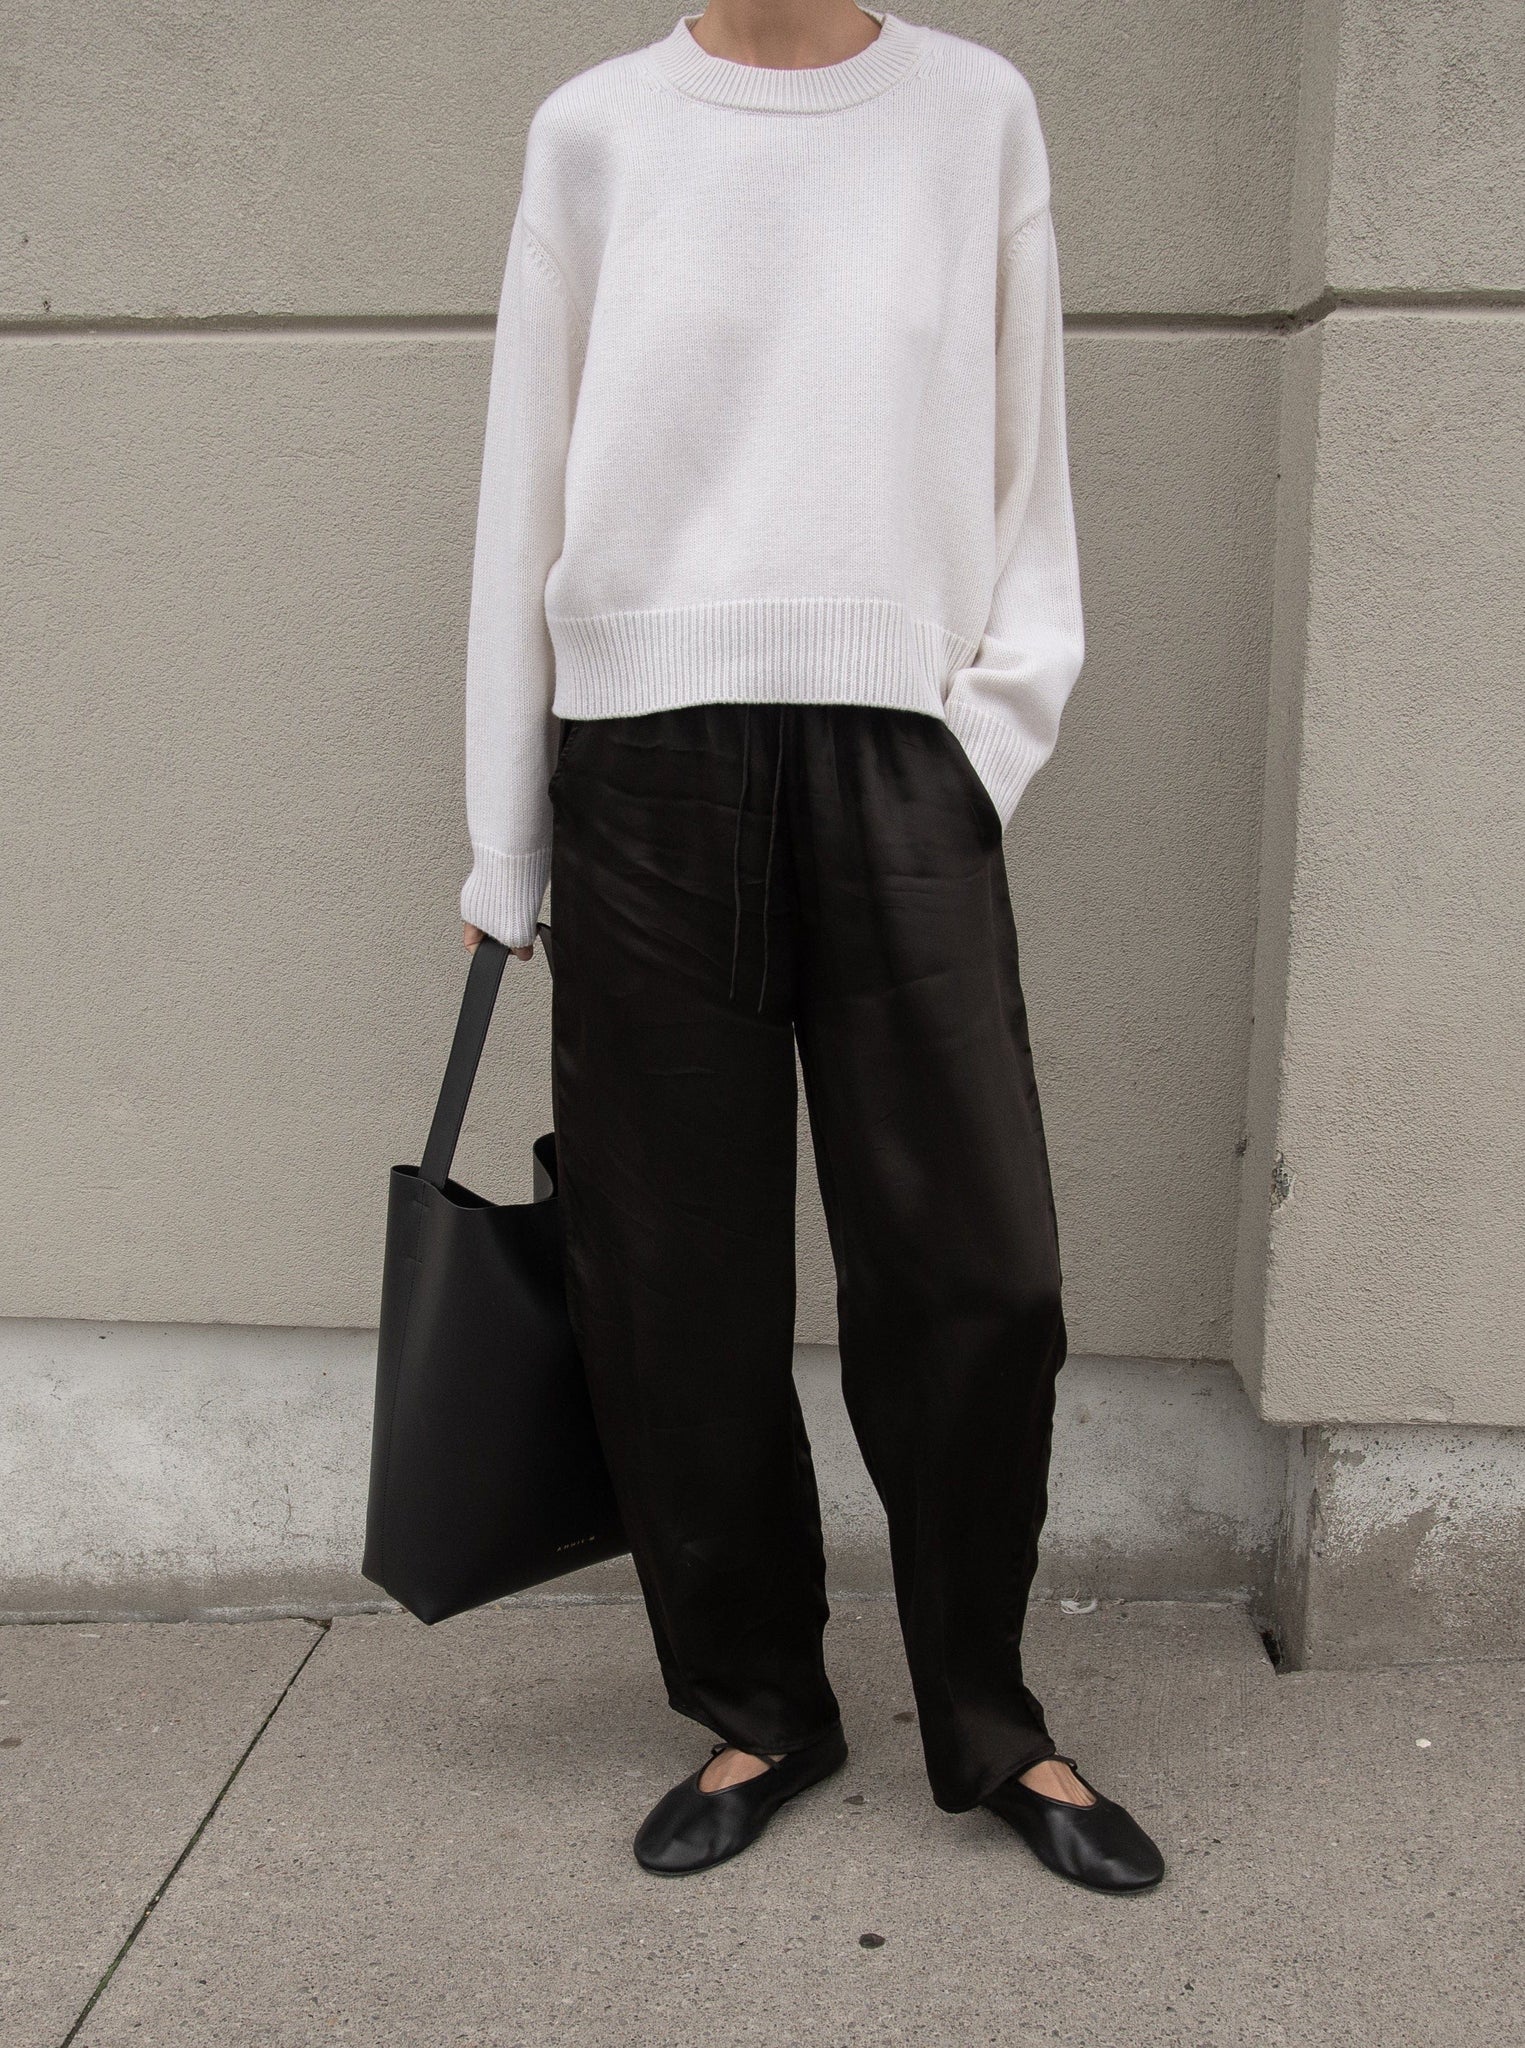 A woman wearing a sustainable Bemberg Cupro white sweater and the Leonie Pant - Black.